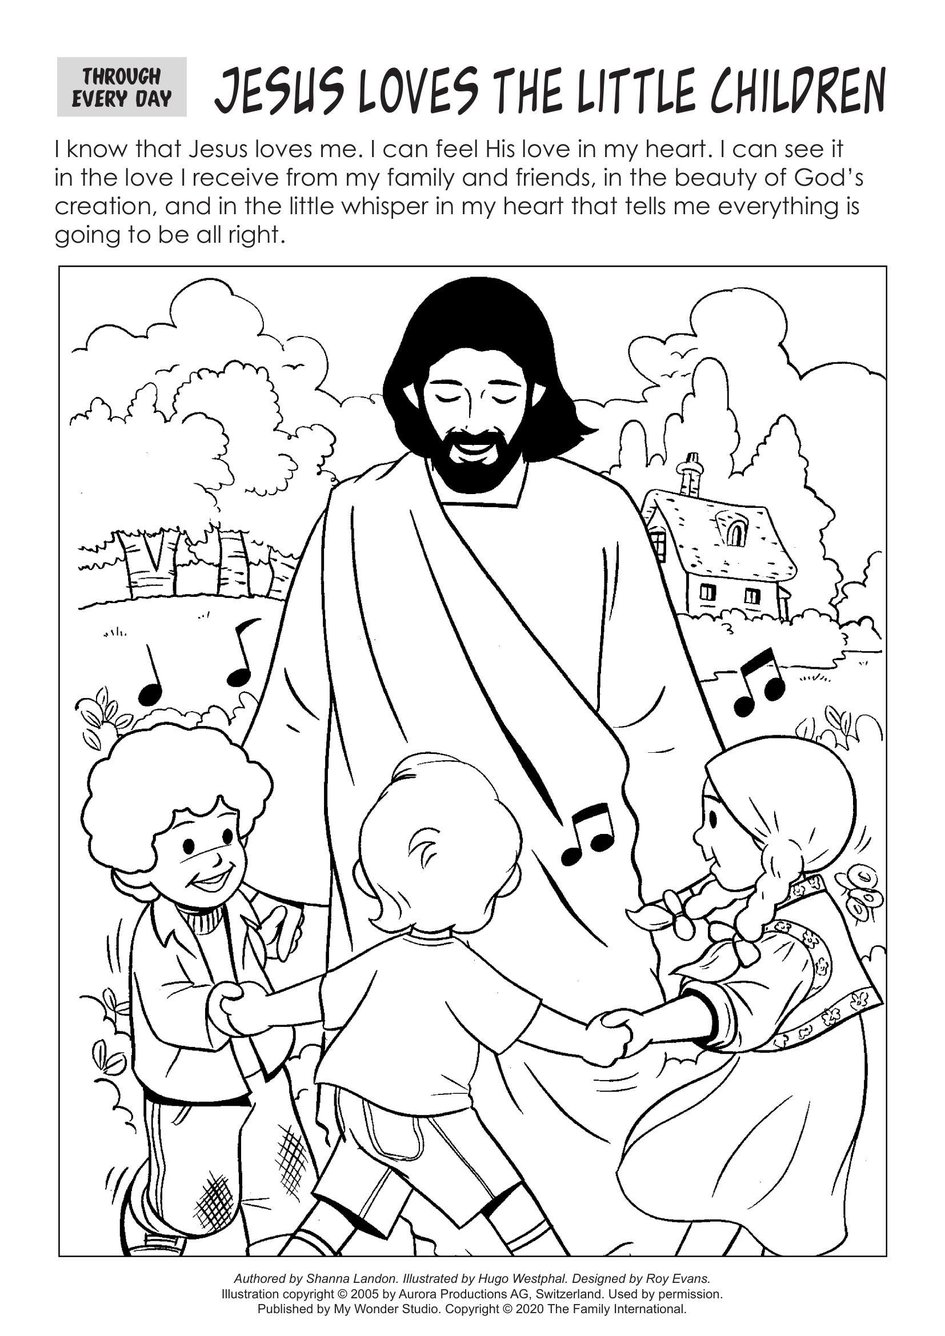 Coloring page through every day jesus loves the little children my wonder studio